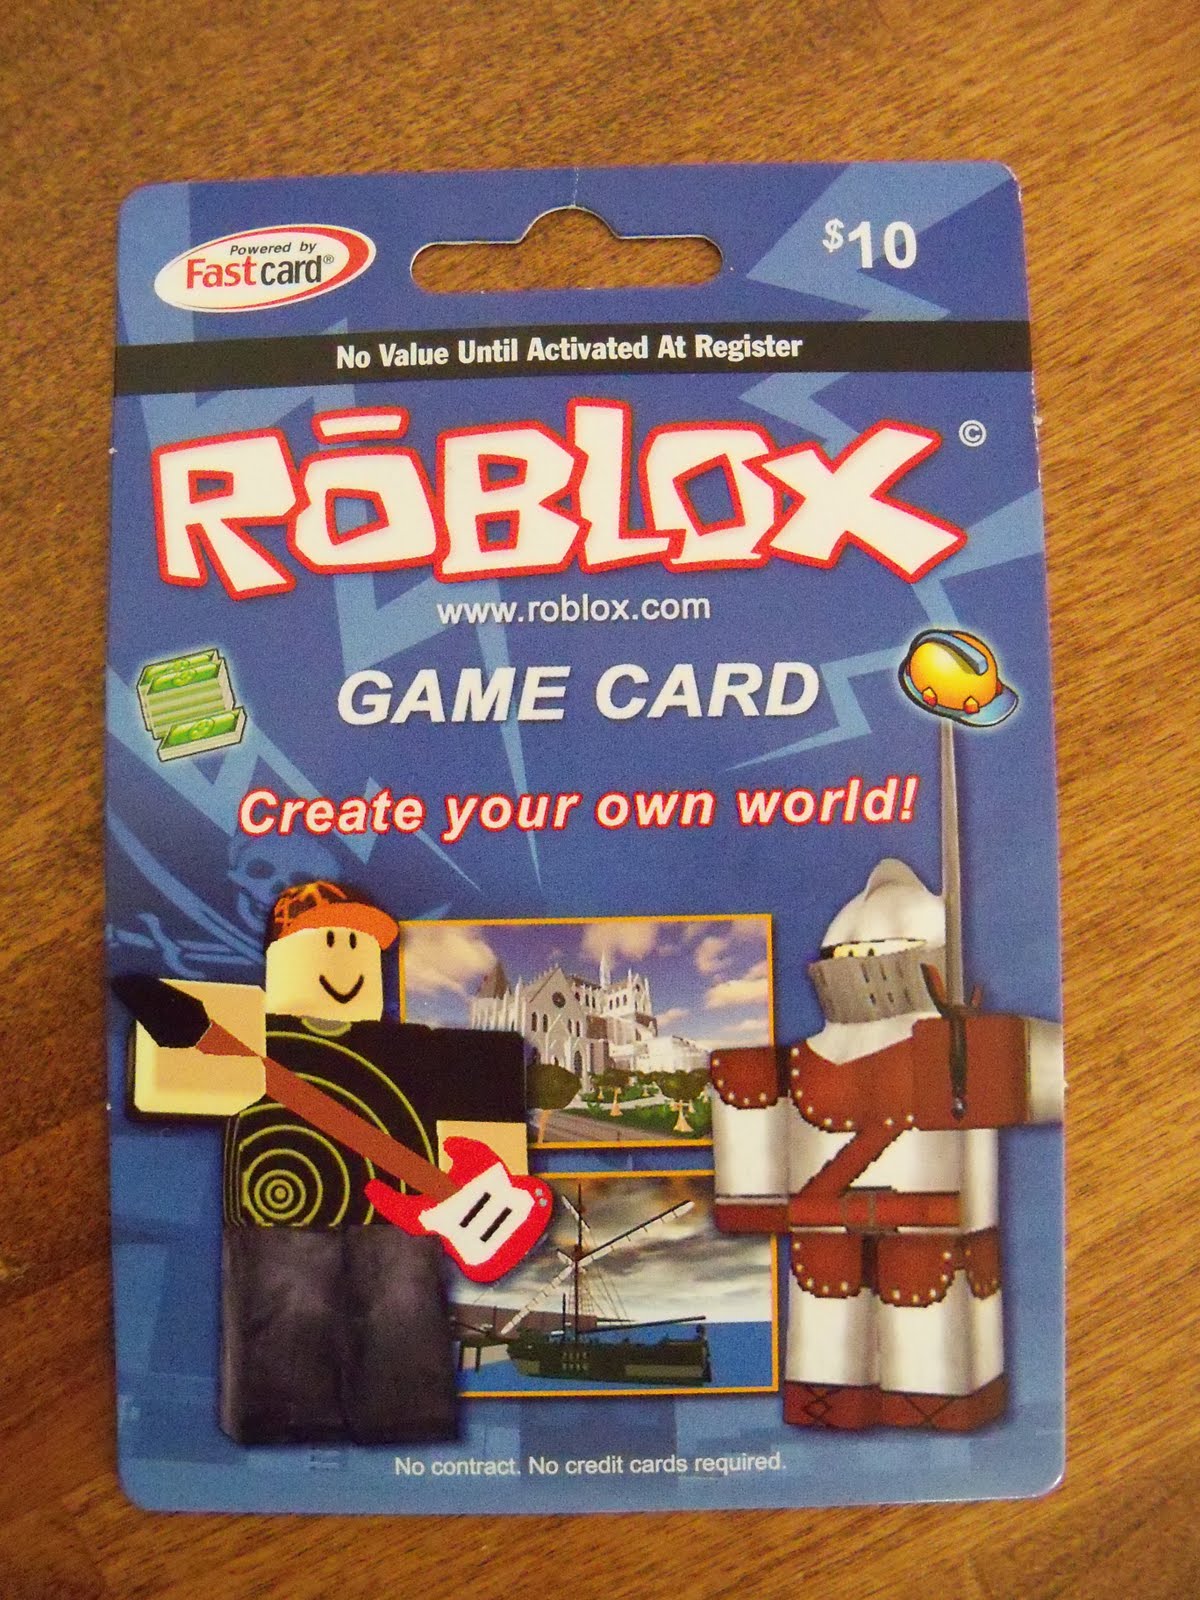 Savings Chatter Best Buy 10 Roblox Card For Free - can 10$ roblox gift card give obc